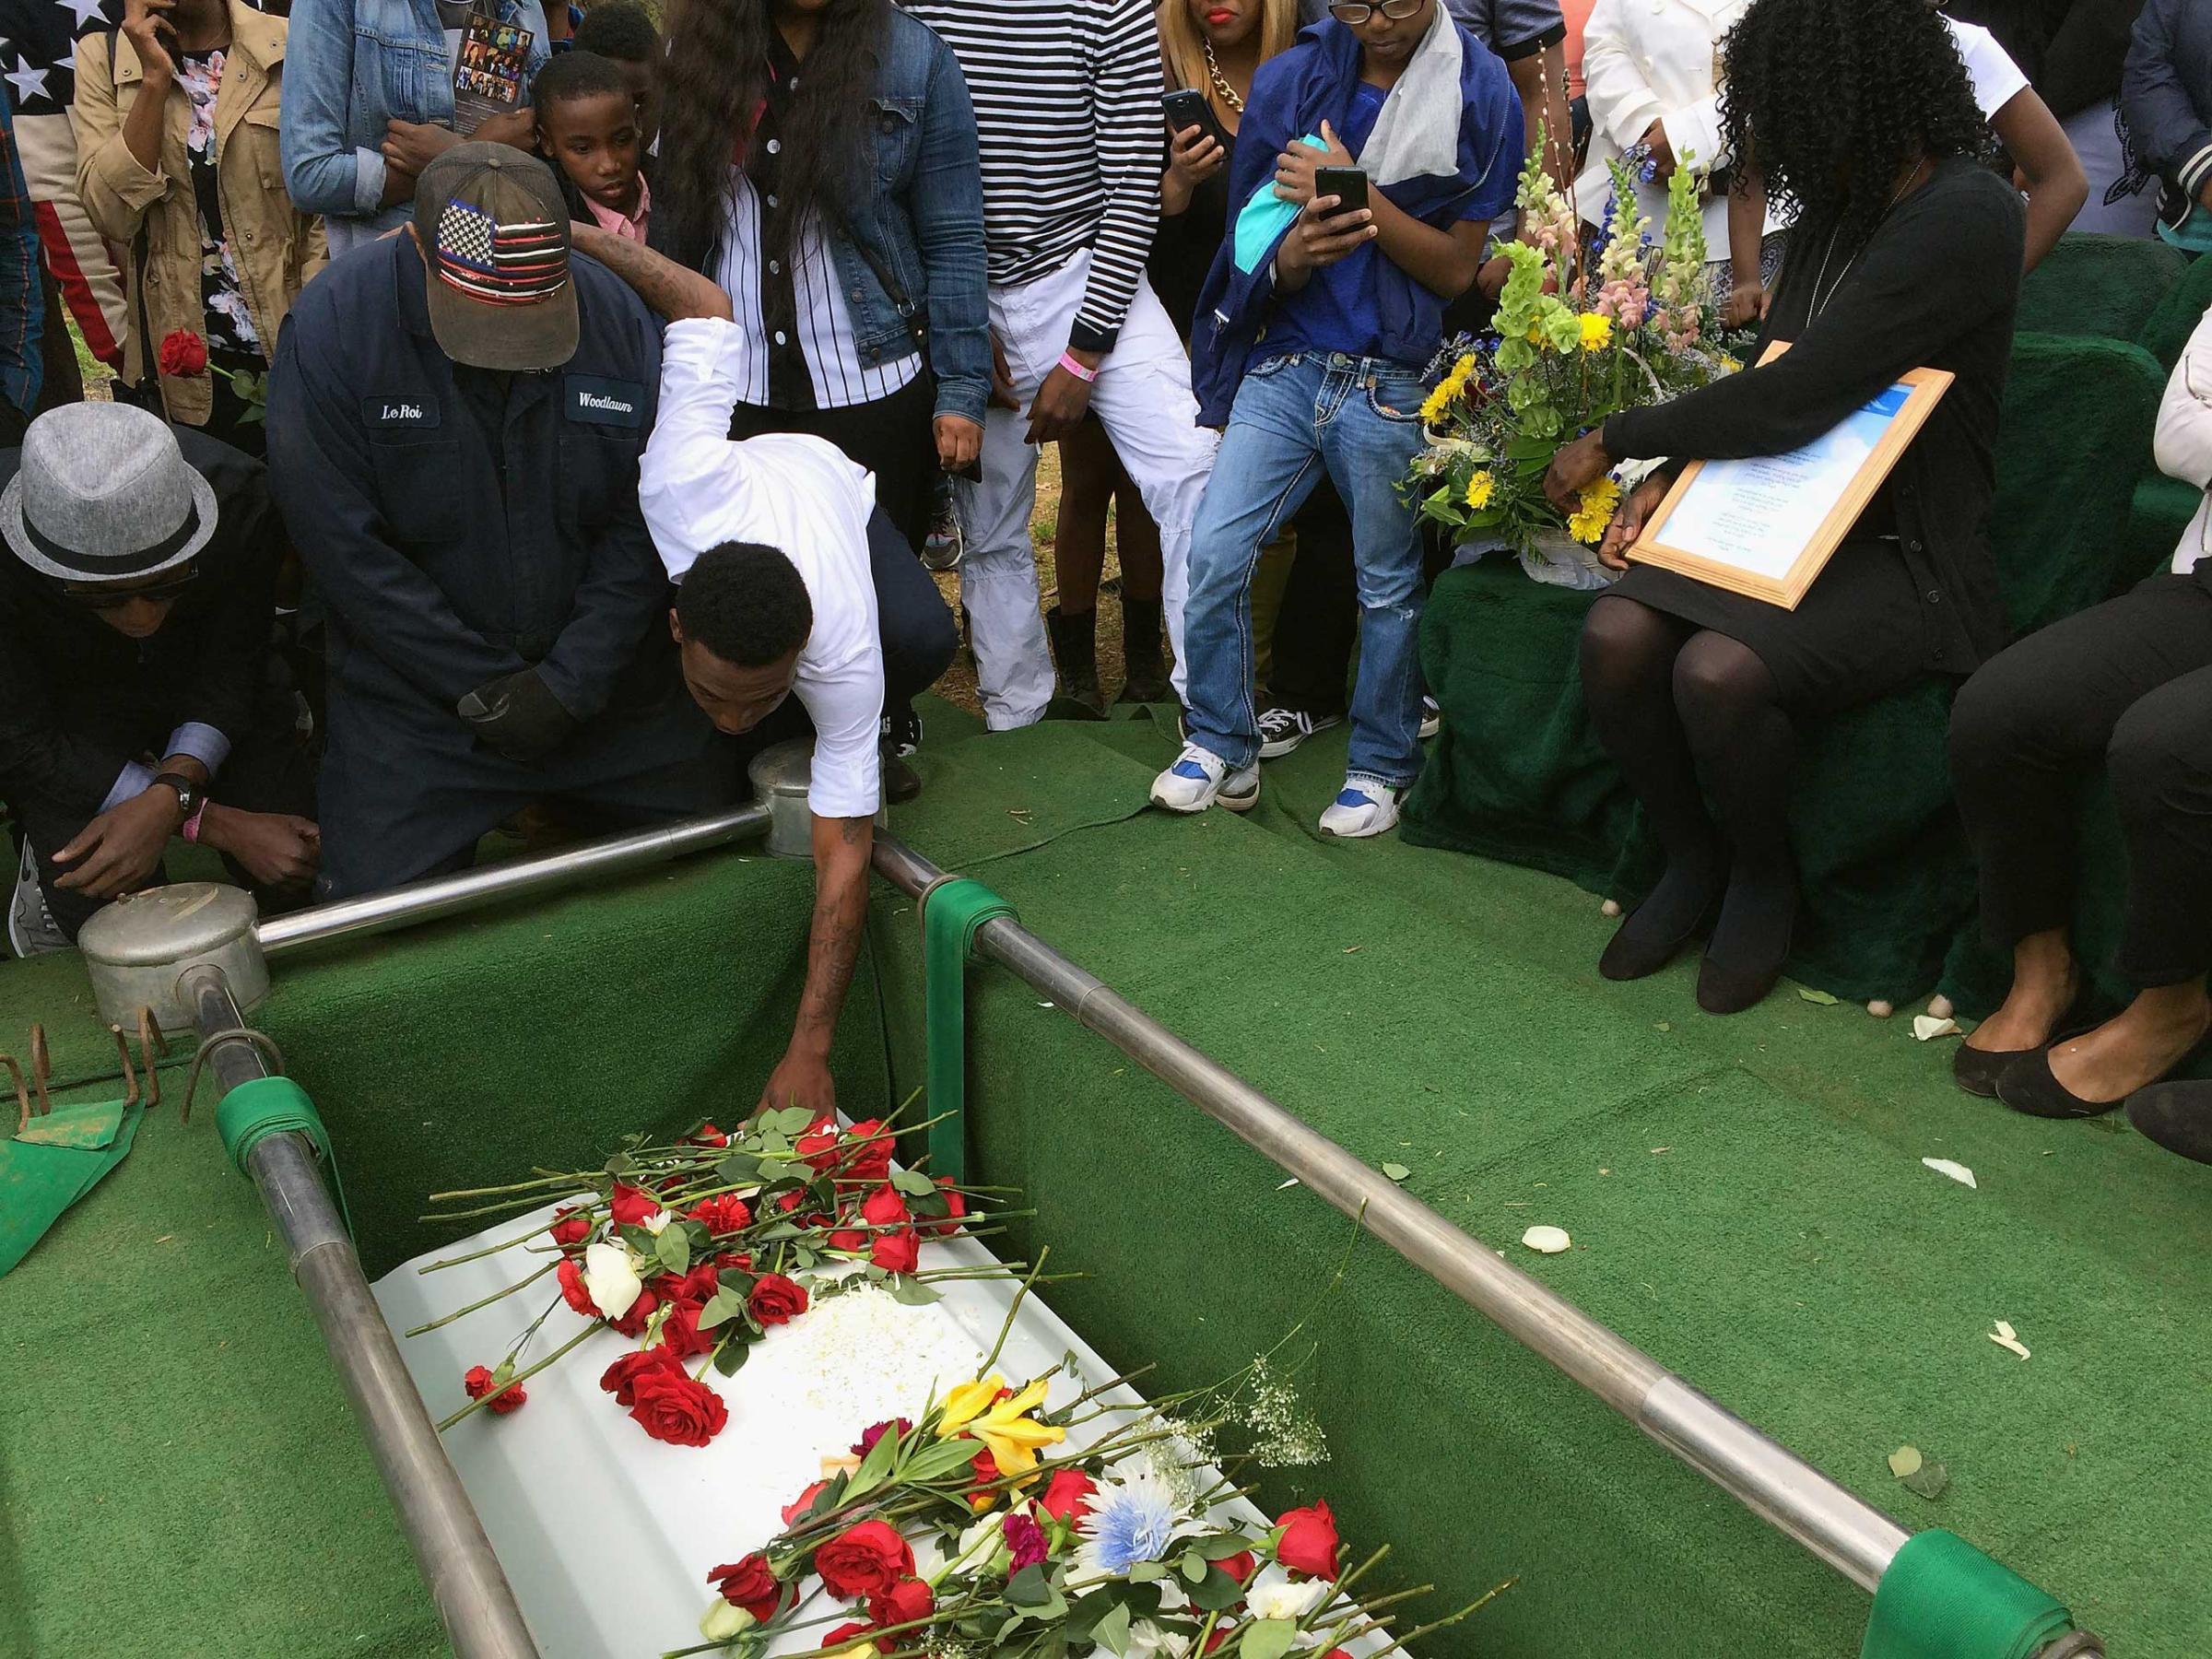 Friends and relatives say their last goodbyes to Freddie Gray as his casket is lowered into his grave at the Woodland Cemetery in Baltimore on April 27, 2015.